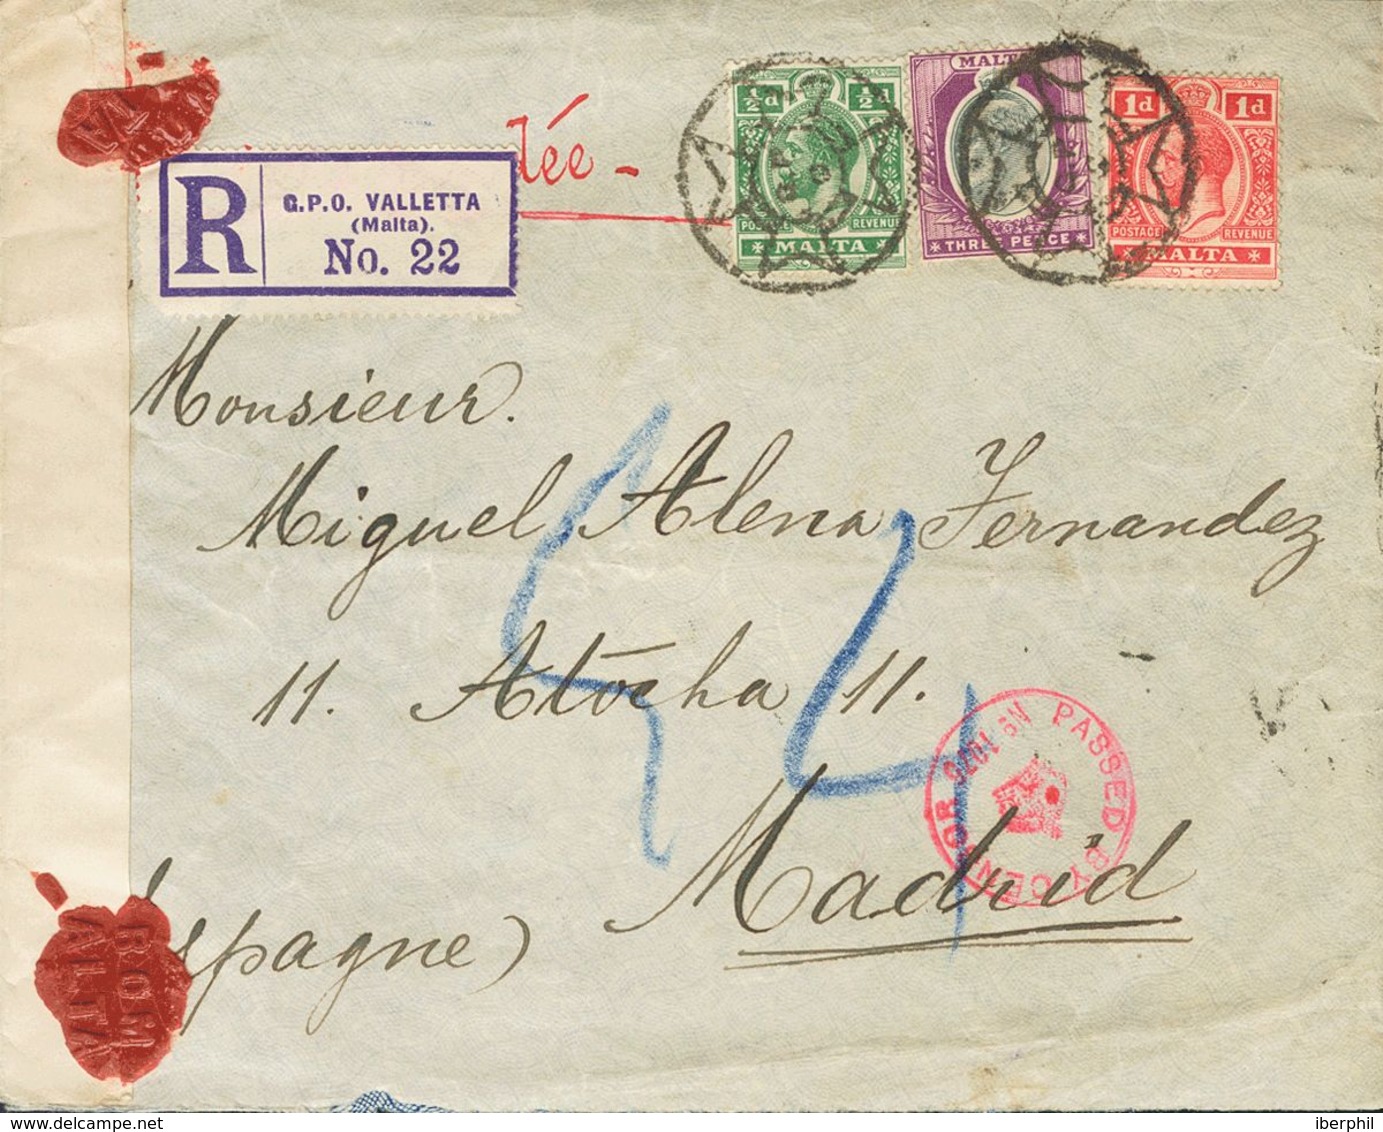 Malta. COVERYv 43, 44, 22. 1915. ½ P Green, 1 P Red And 3 P Lilac And Gray (Edward VII). Registered From LA VALETA To MA - Malta